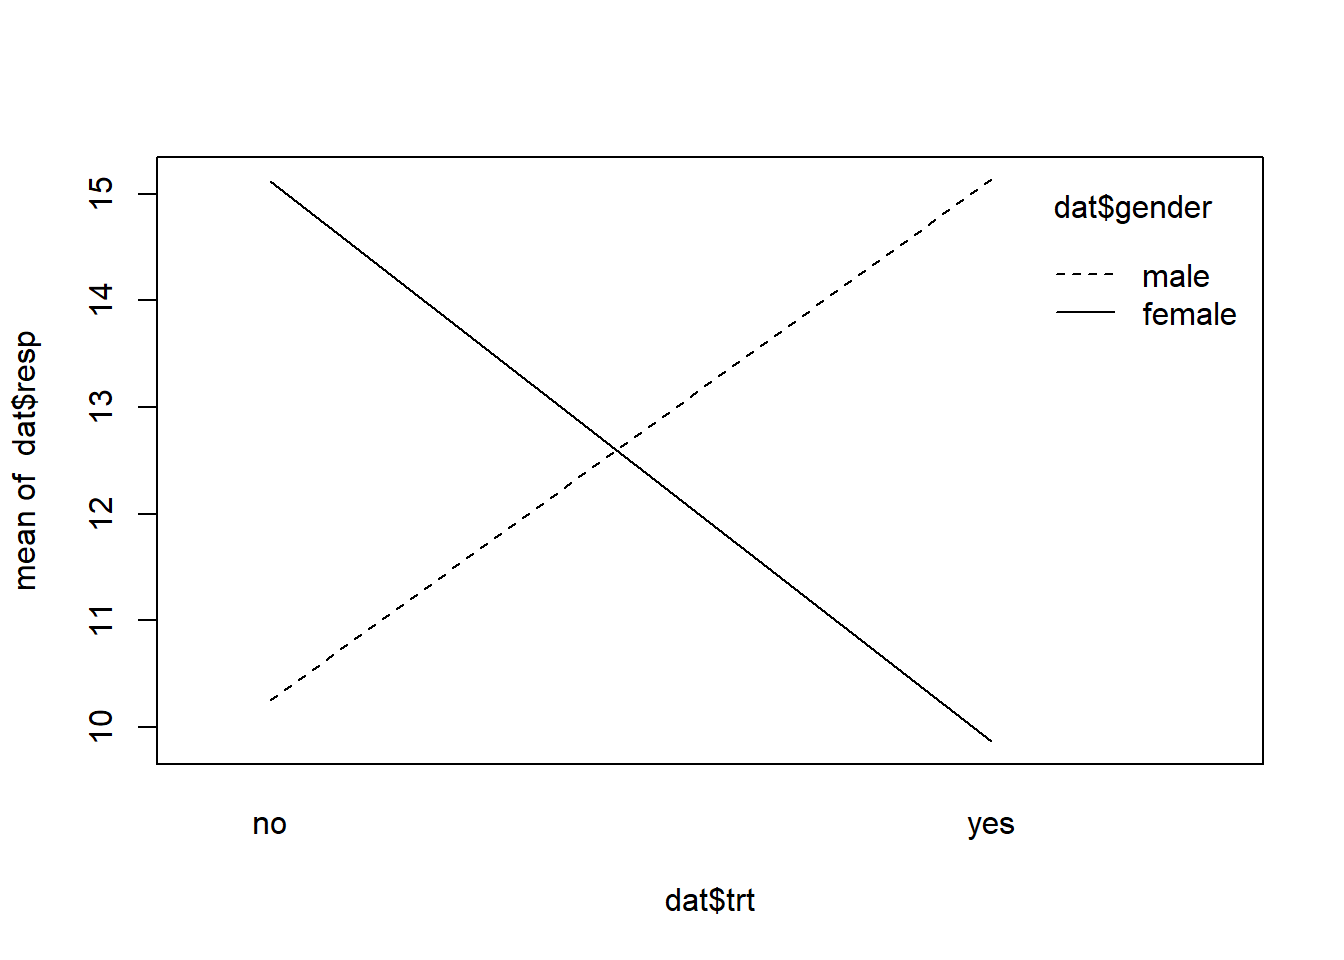 Interaction plot of gender and treatment